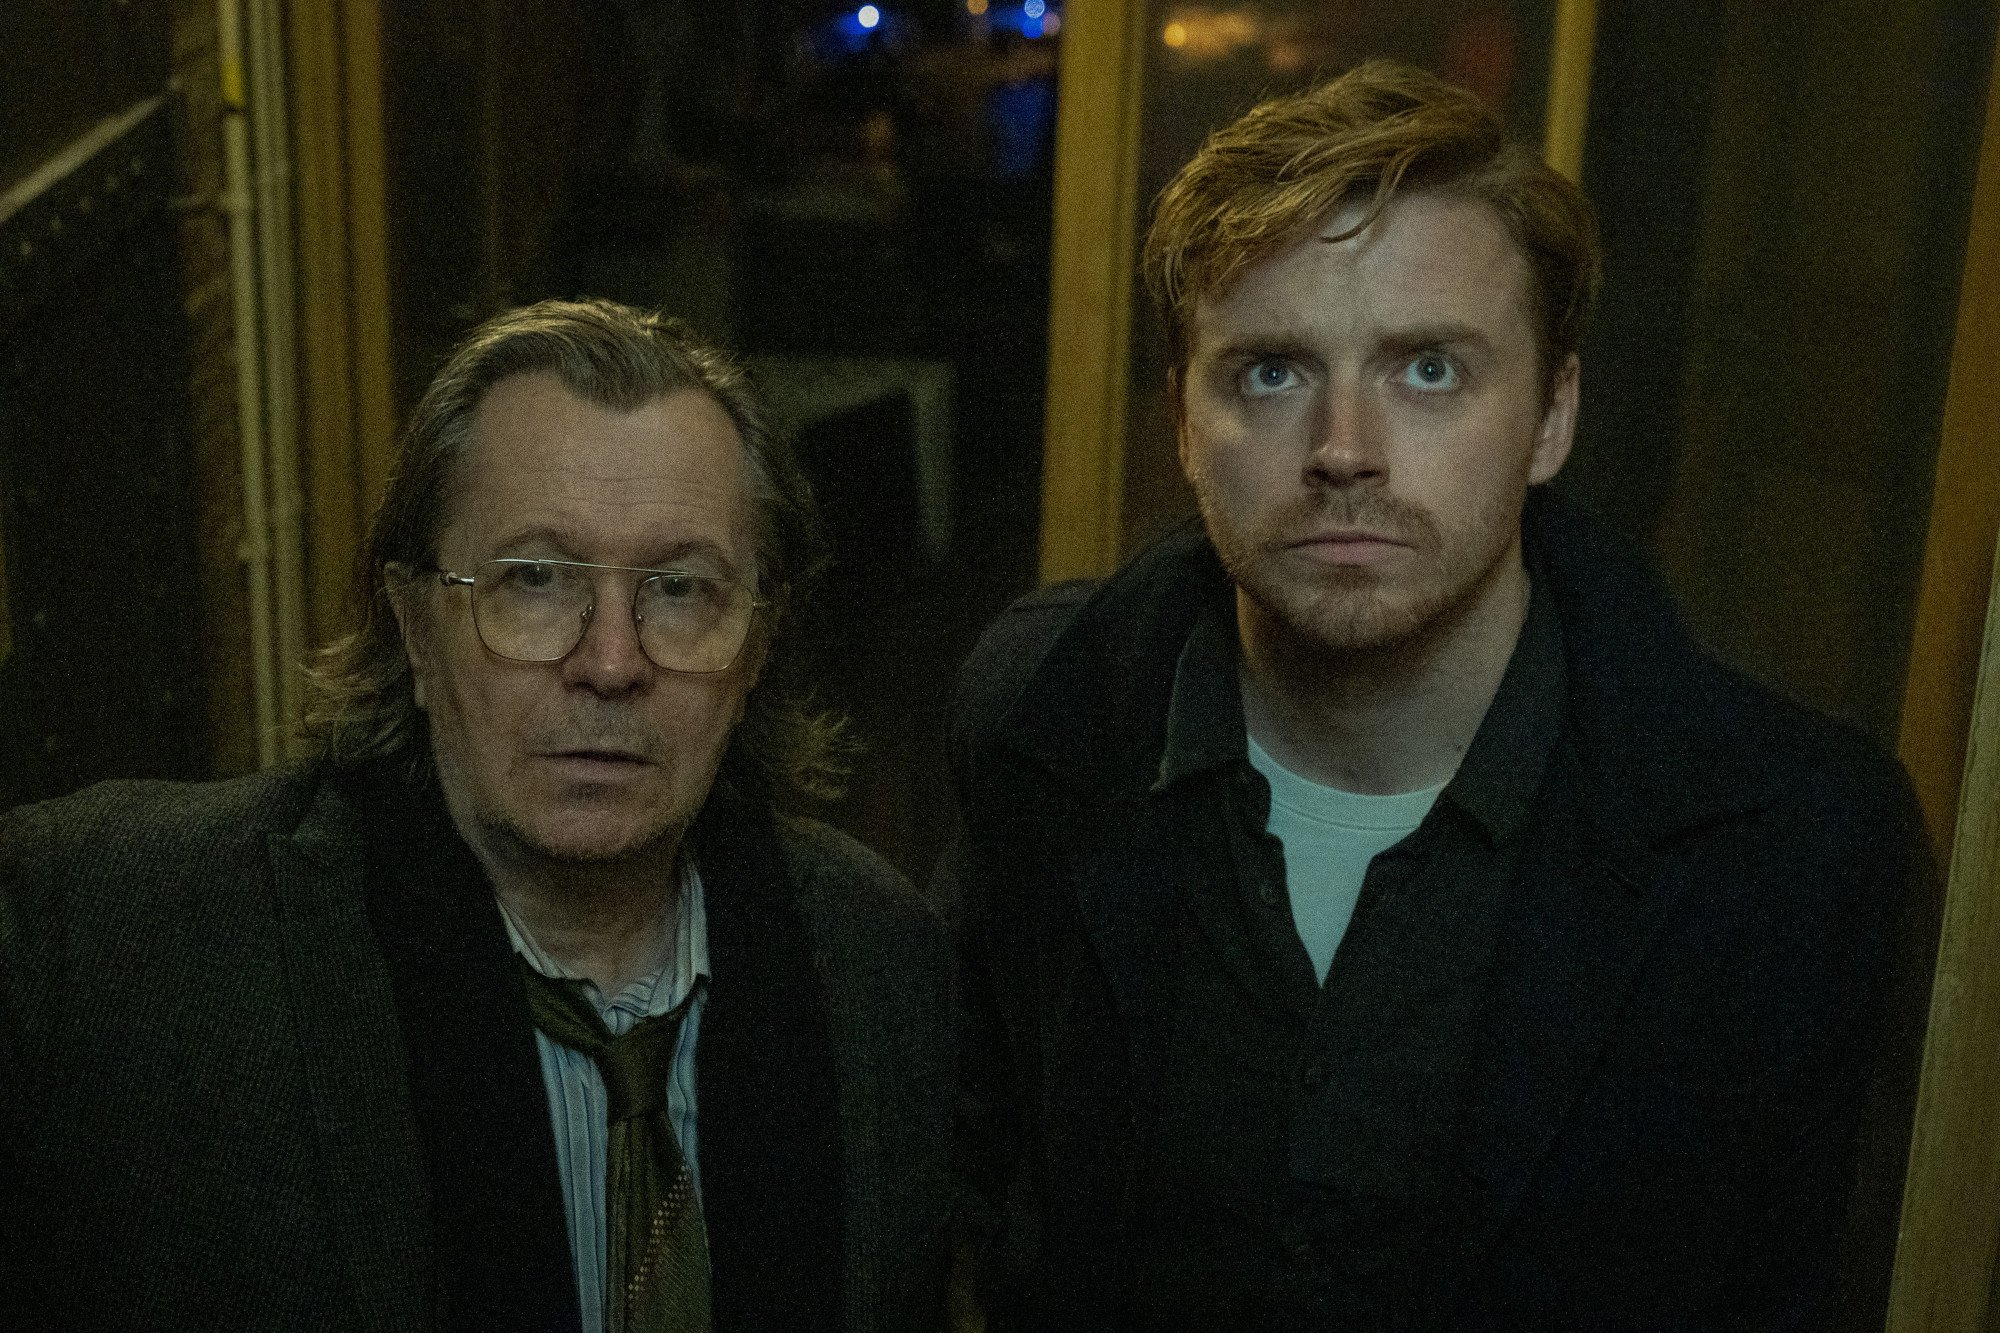 Gary Oldman and Jack Lowden in 'Slow Horses.' They're standing next to one another and looking up.